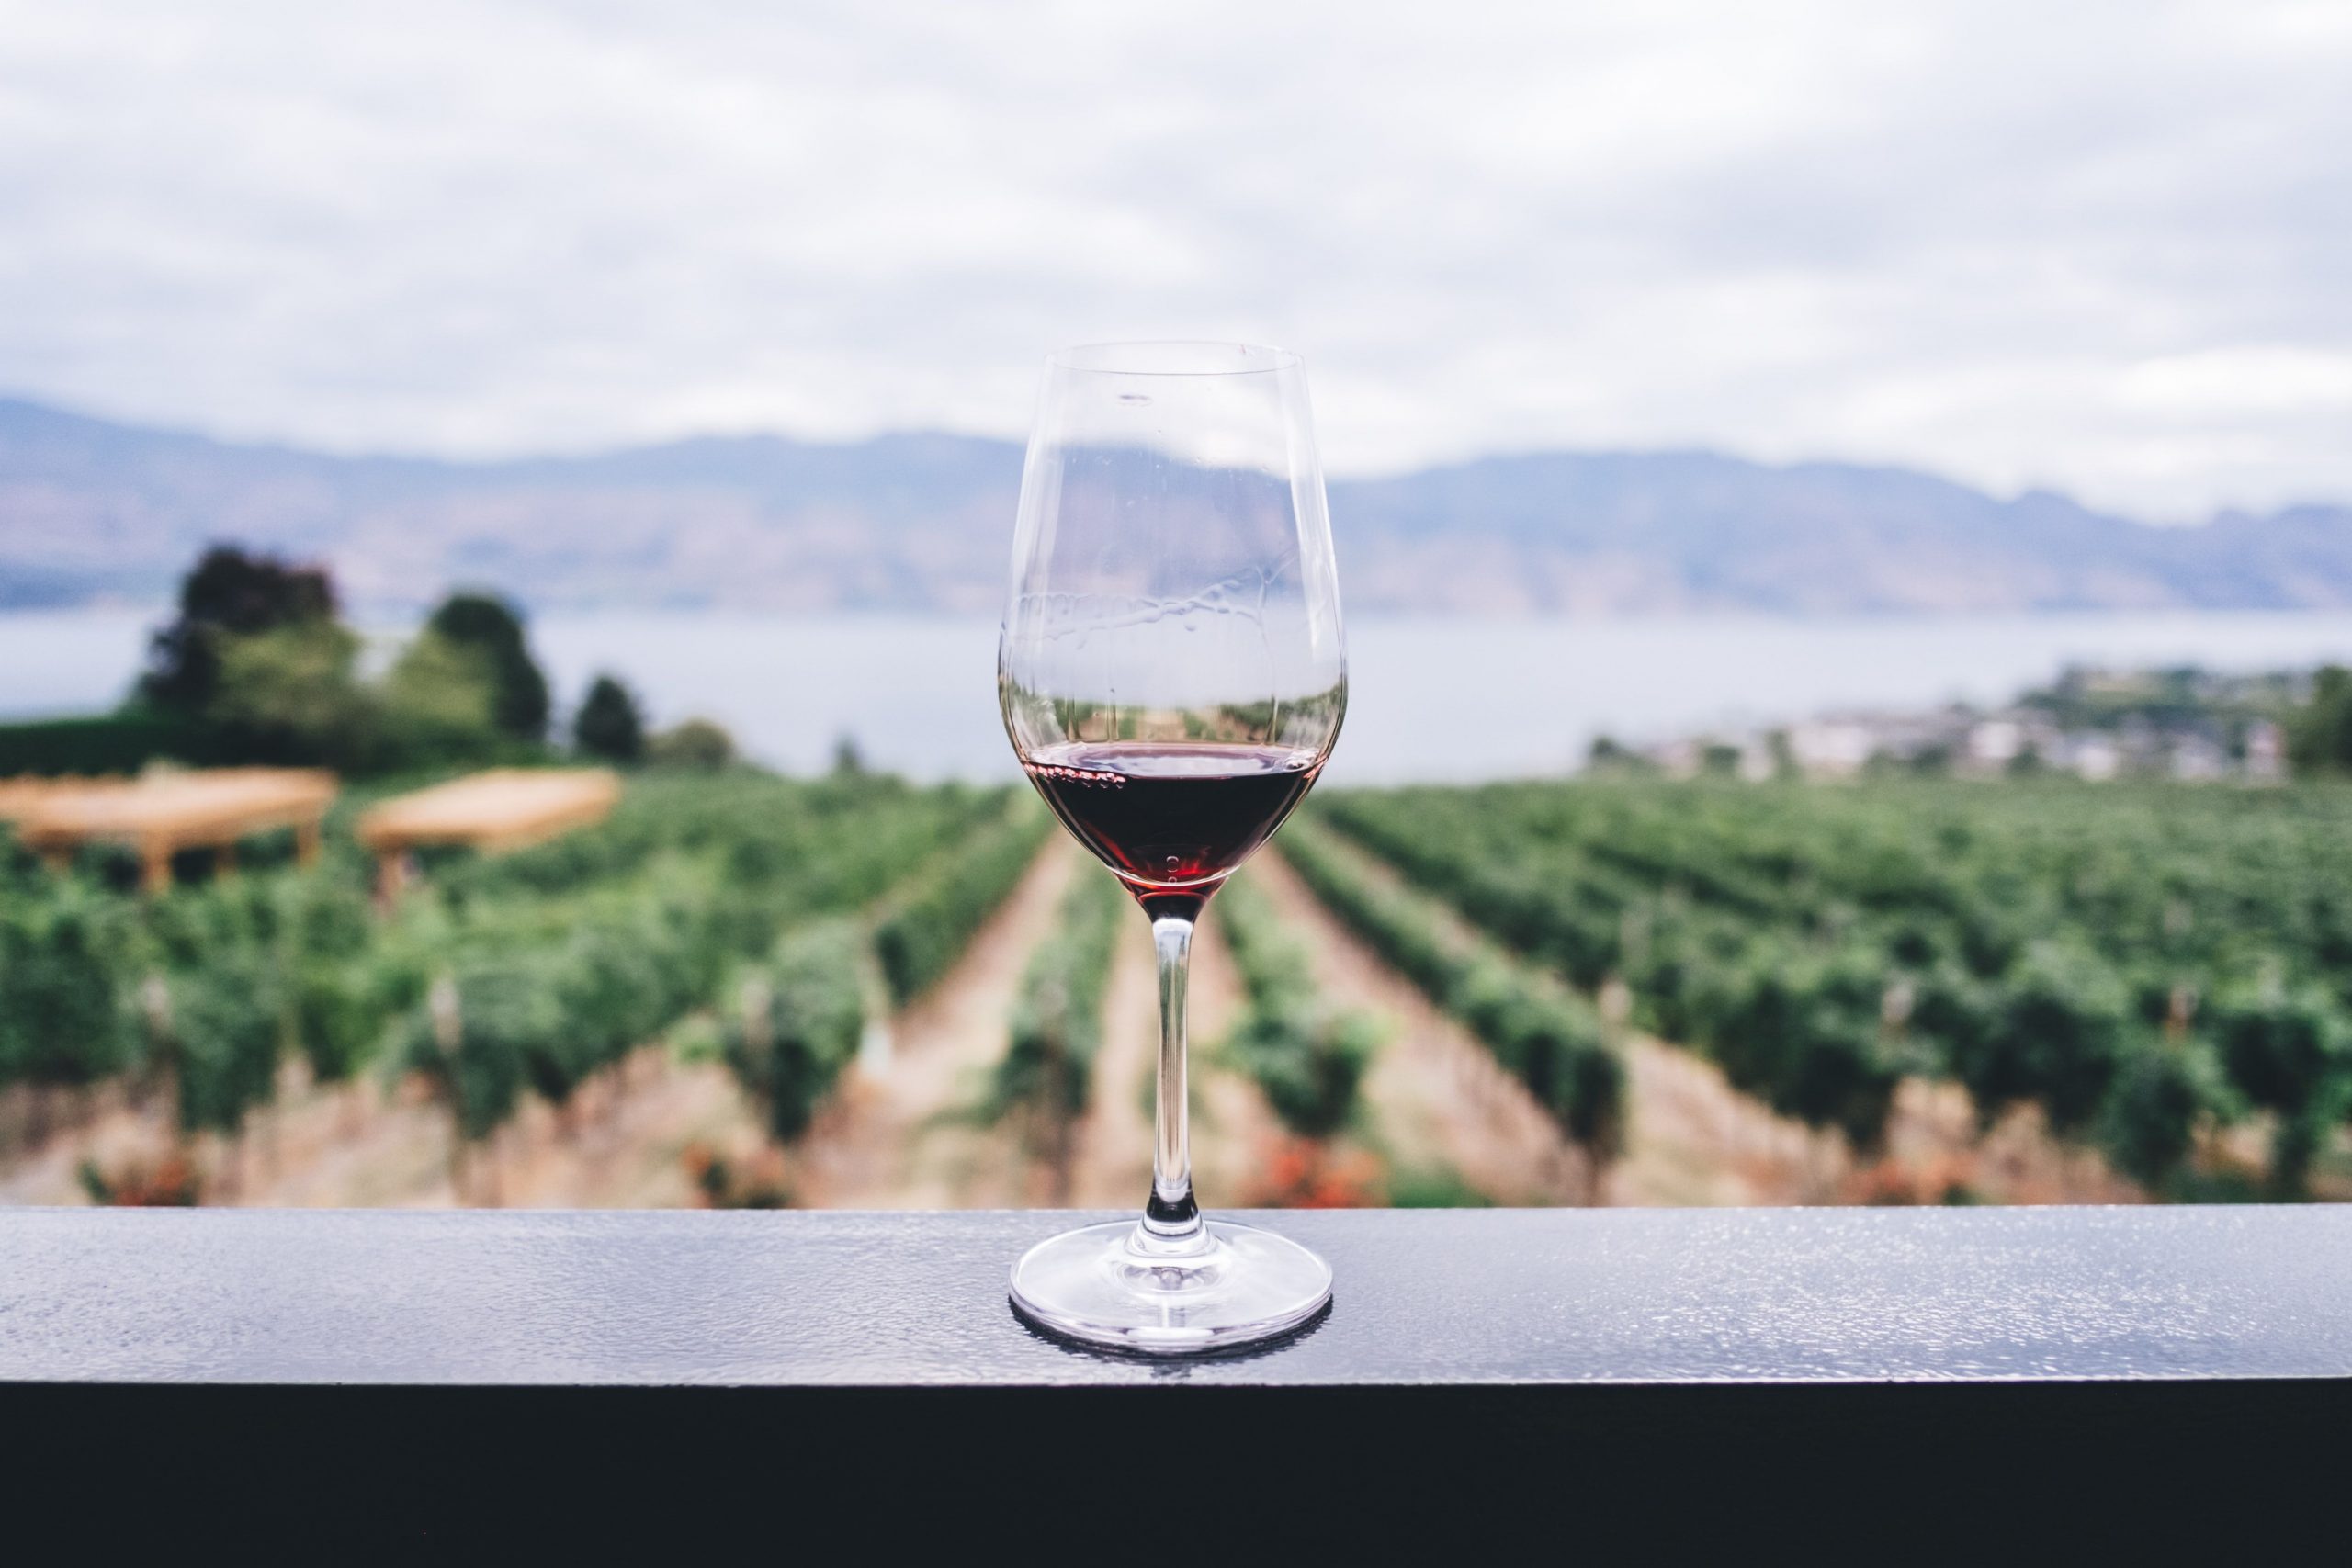 Can red wine prevent COVID-19? Chinese study claims it does